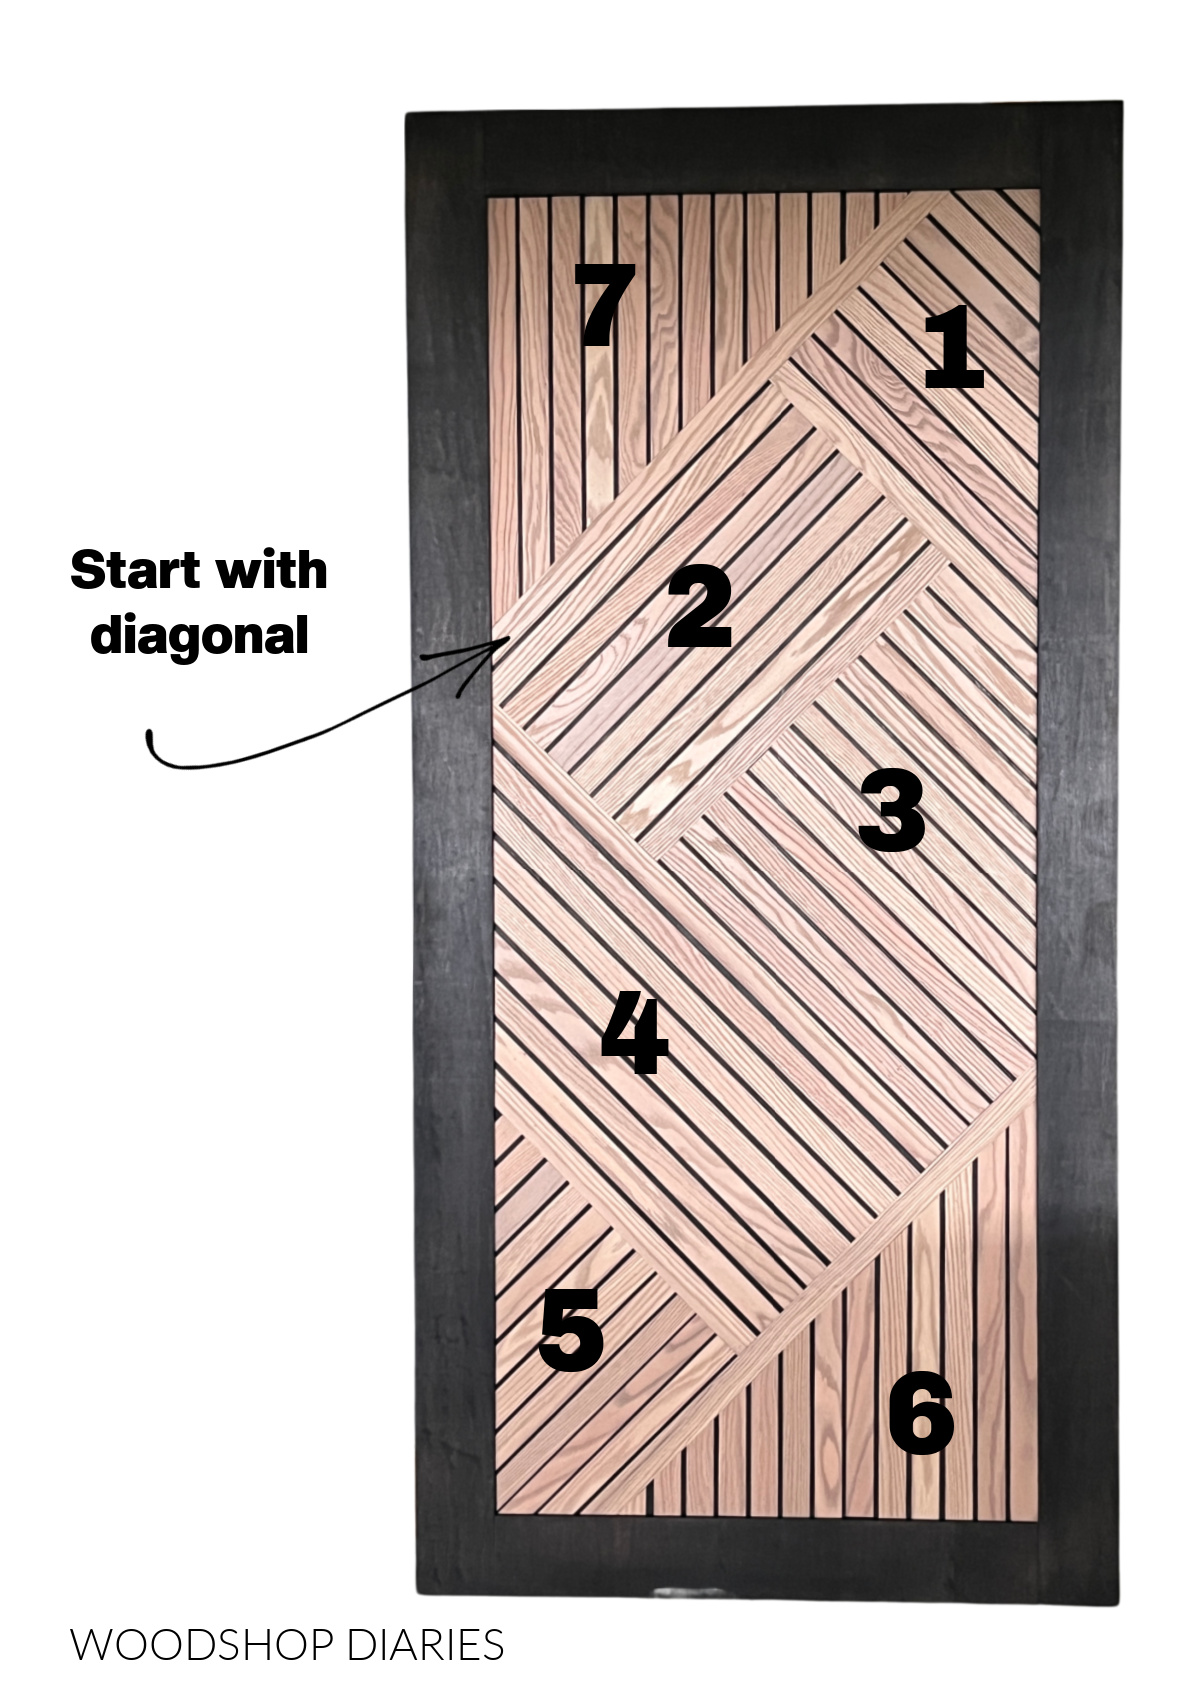 Diagram showing sections of wood slats on sliding door panel with numbers ordering which sections to do first